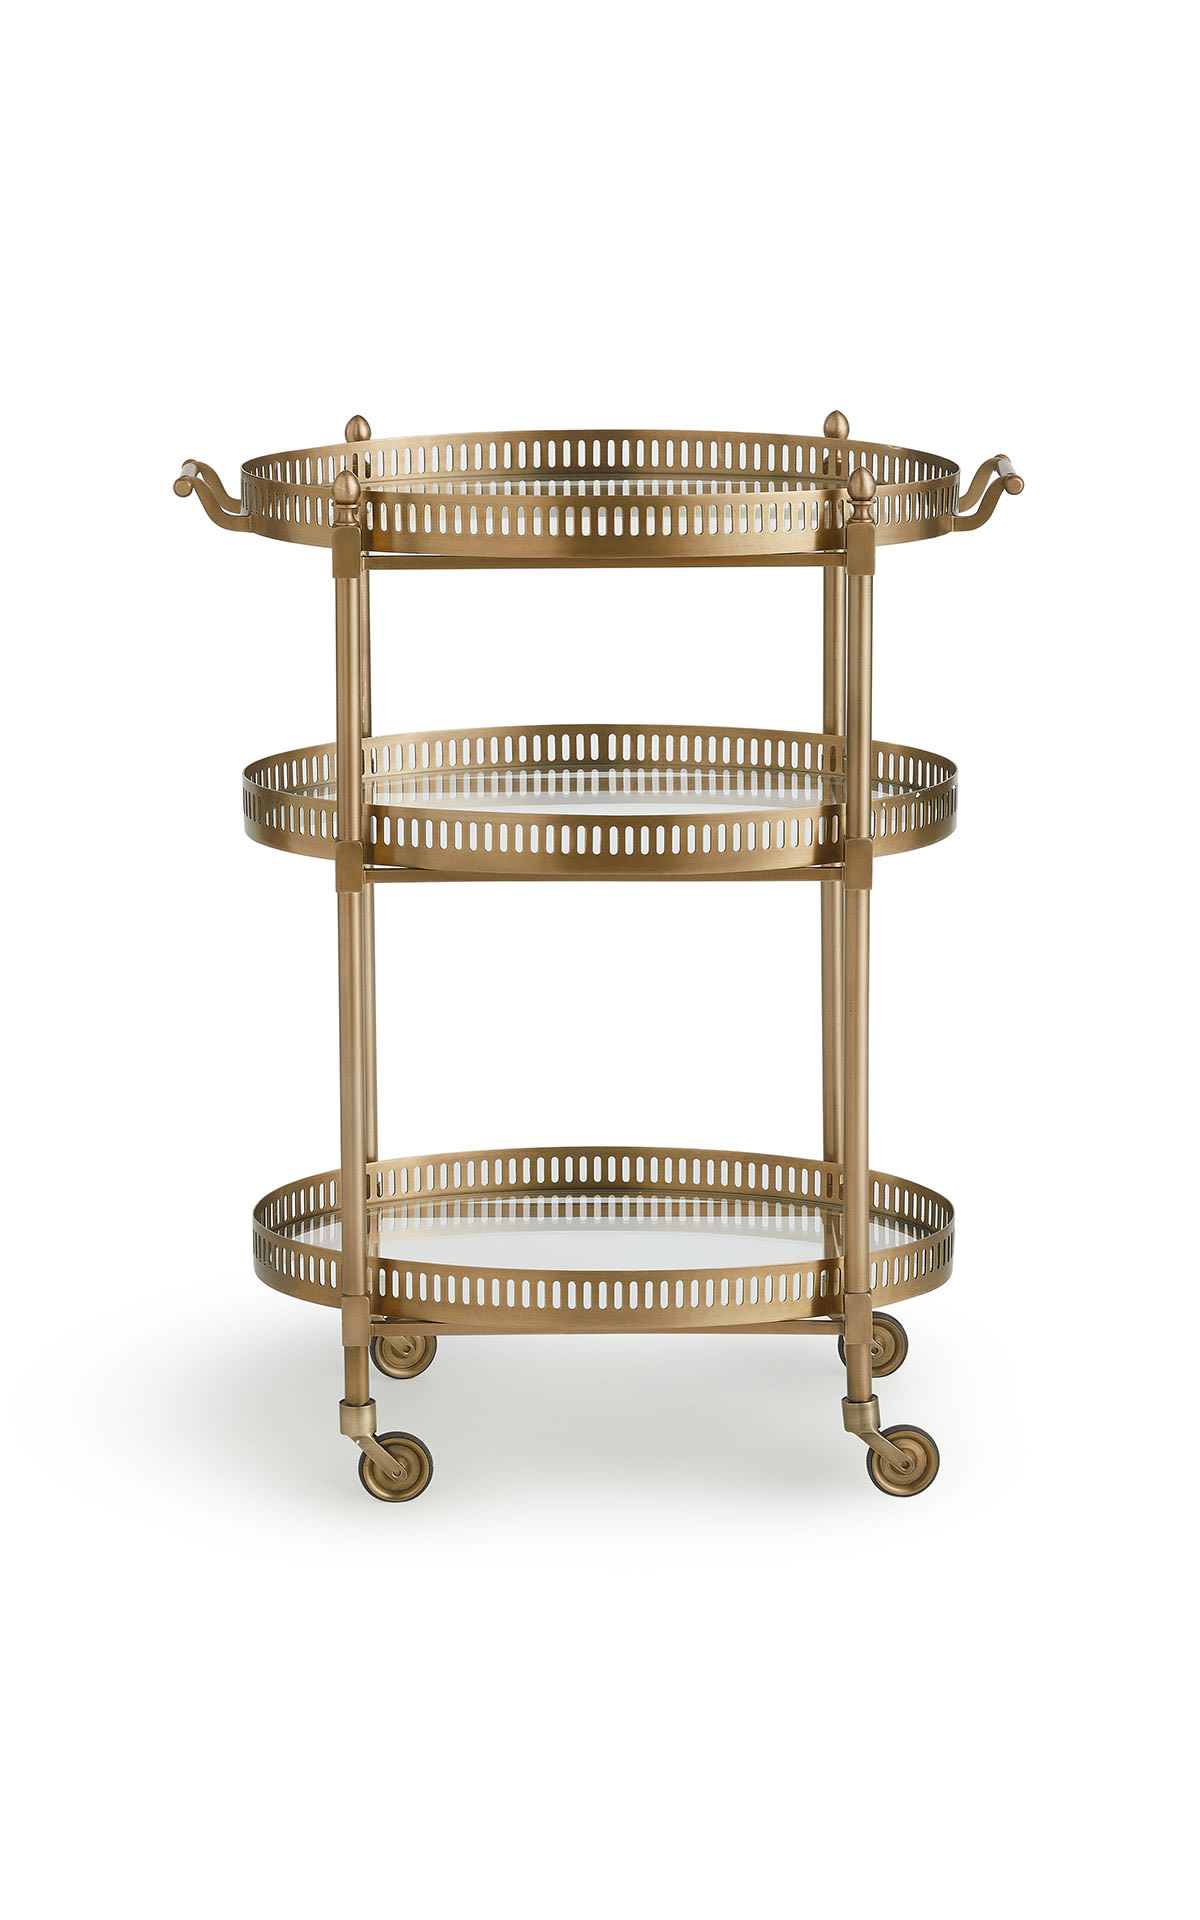 Soho Home Oval bar cart from Bicester Village